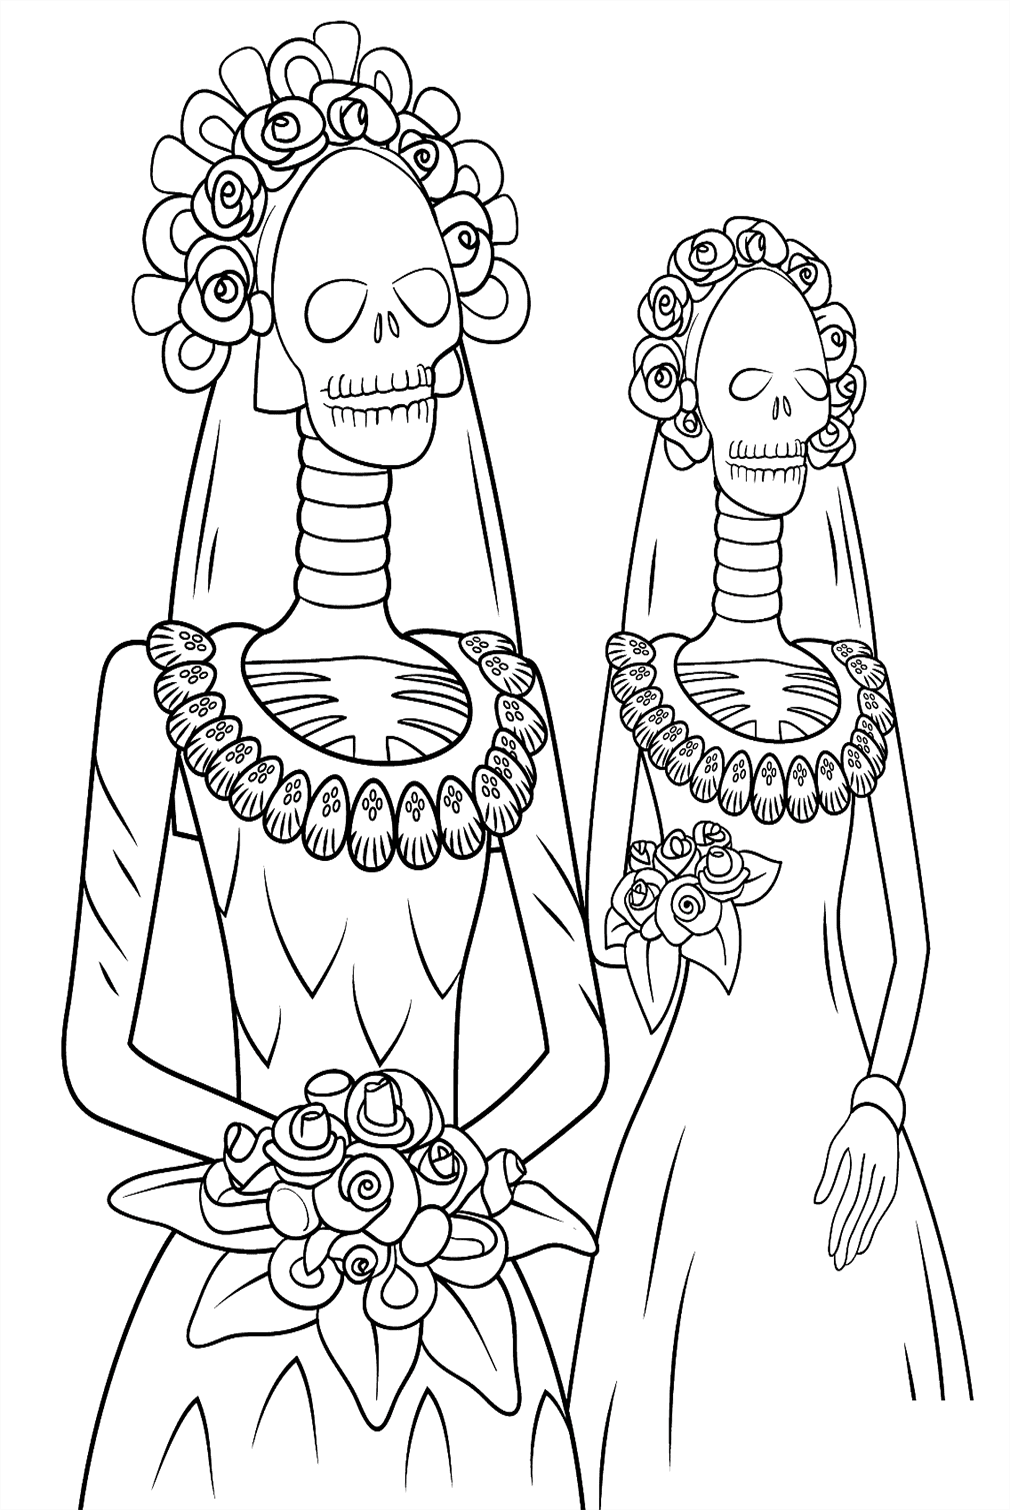 Day of The Dead Skeleton Brides from Day Of The Dead